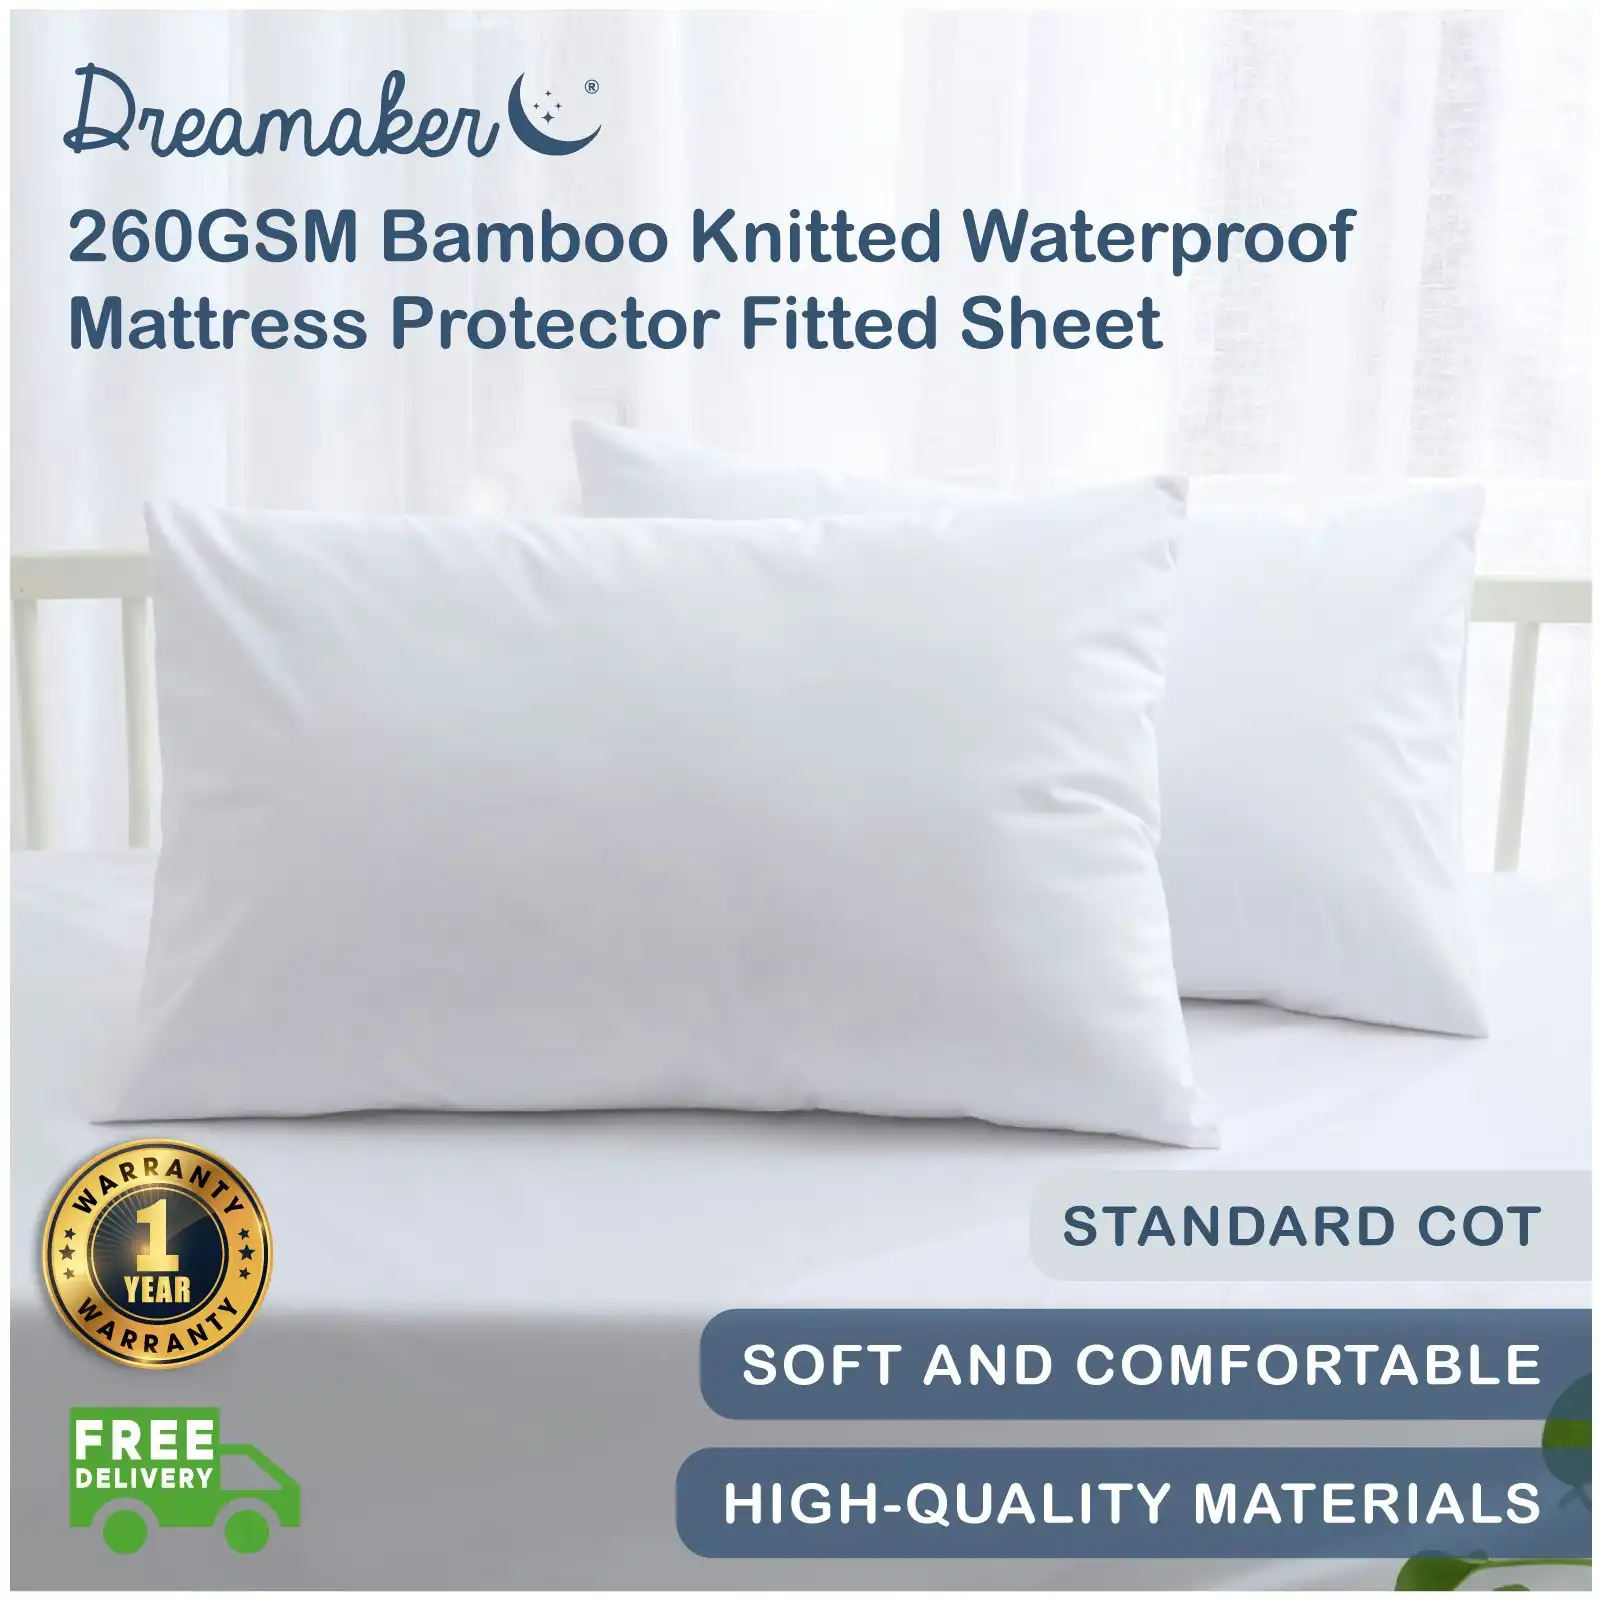 Dreamaker 260gsm Bamboo Knitted Baby COT Waterproof Mattress Protector White Fitted Sheet Standard